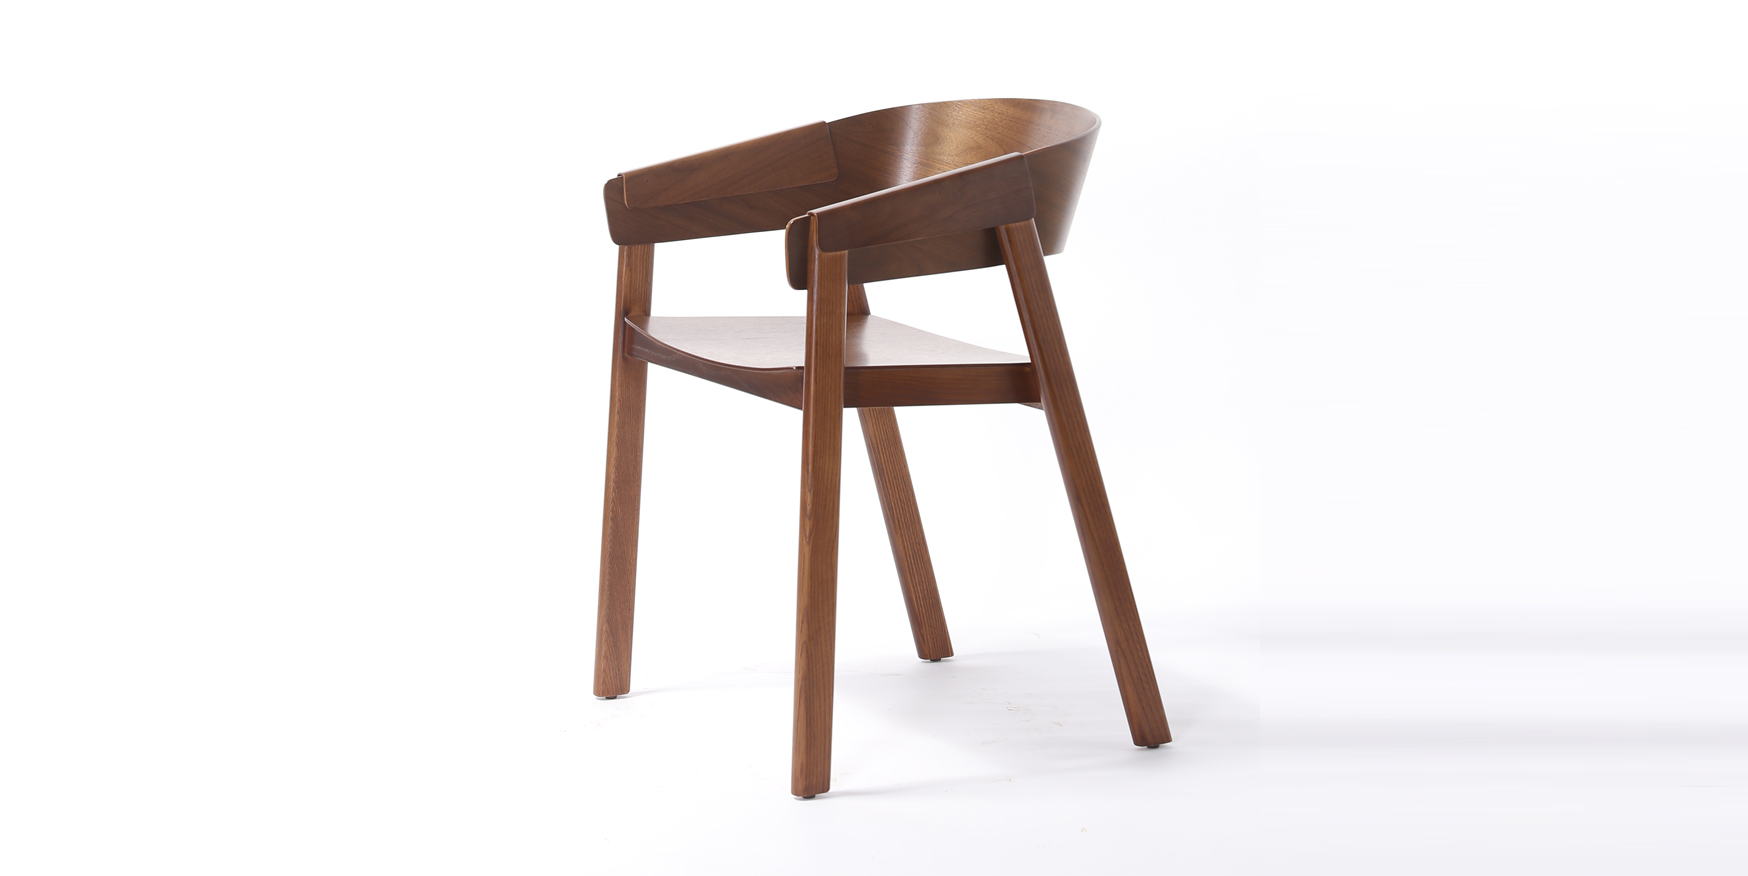 bentwood dining chairs with arms
